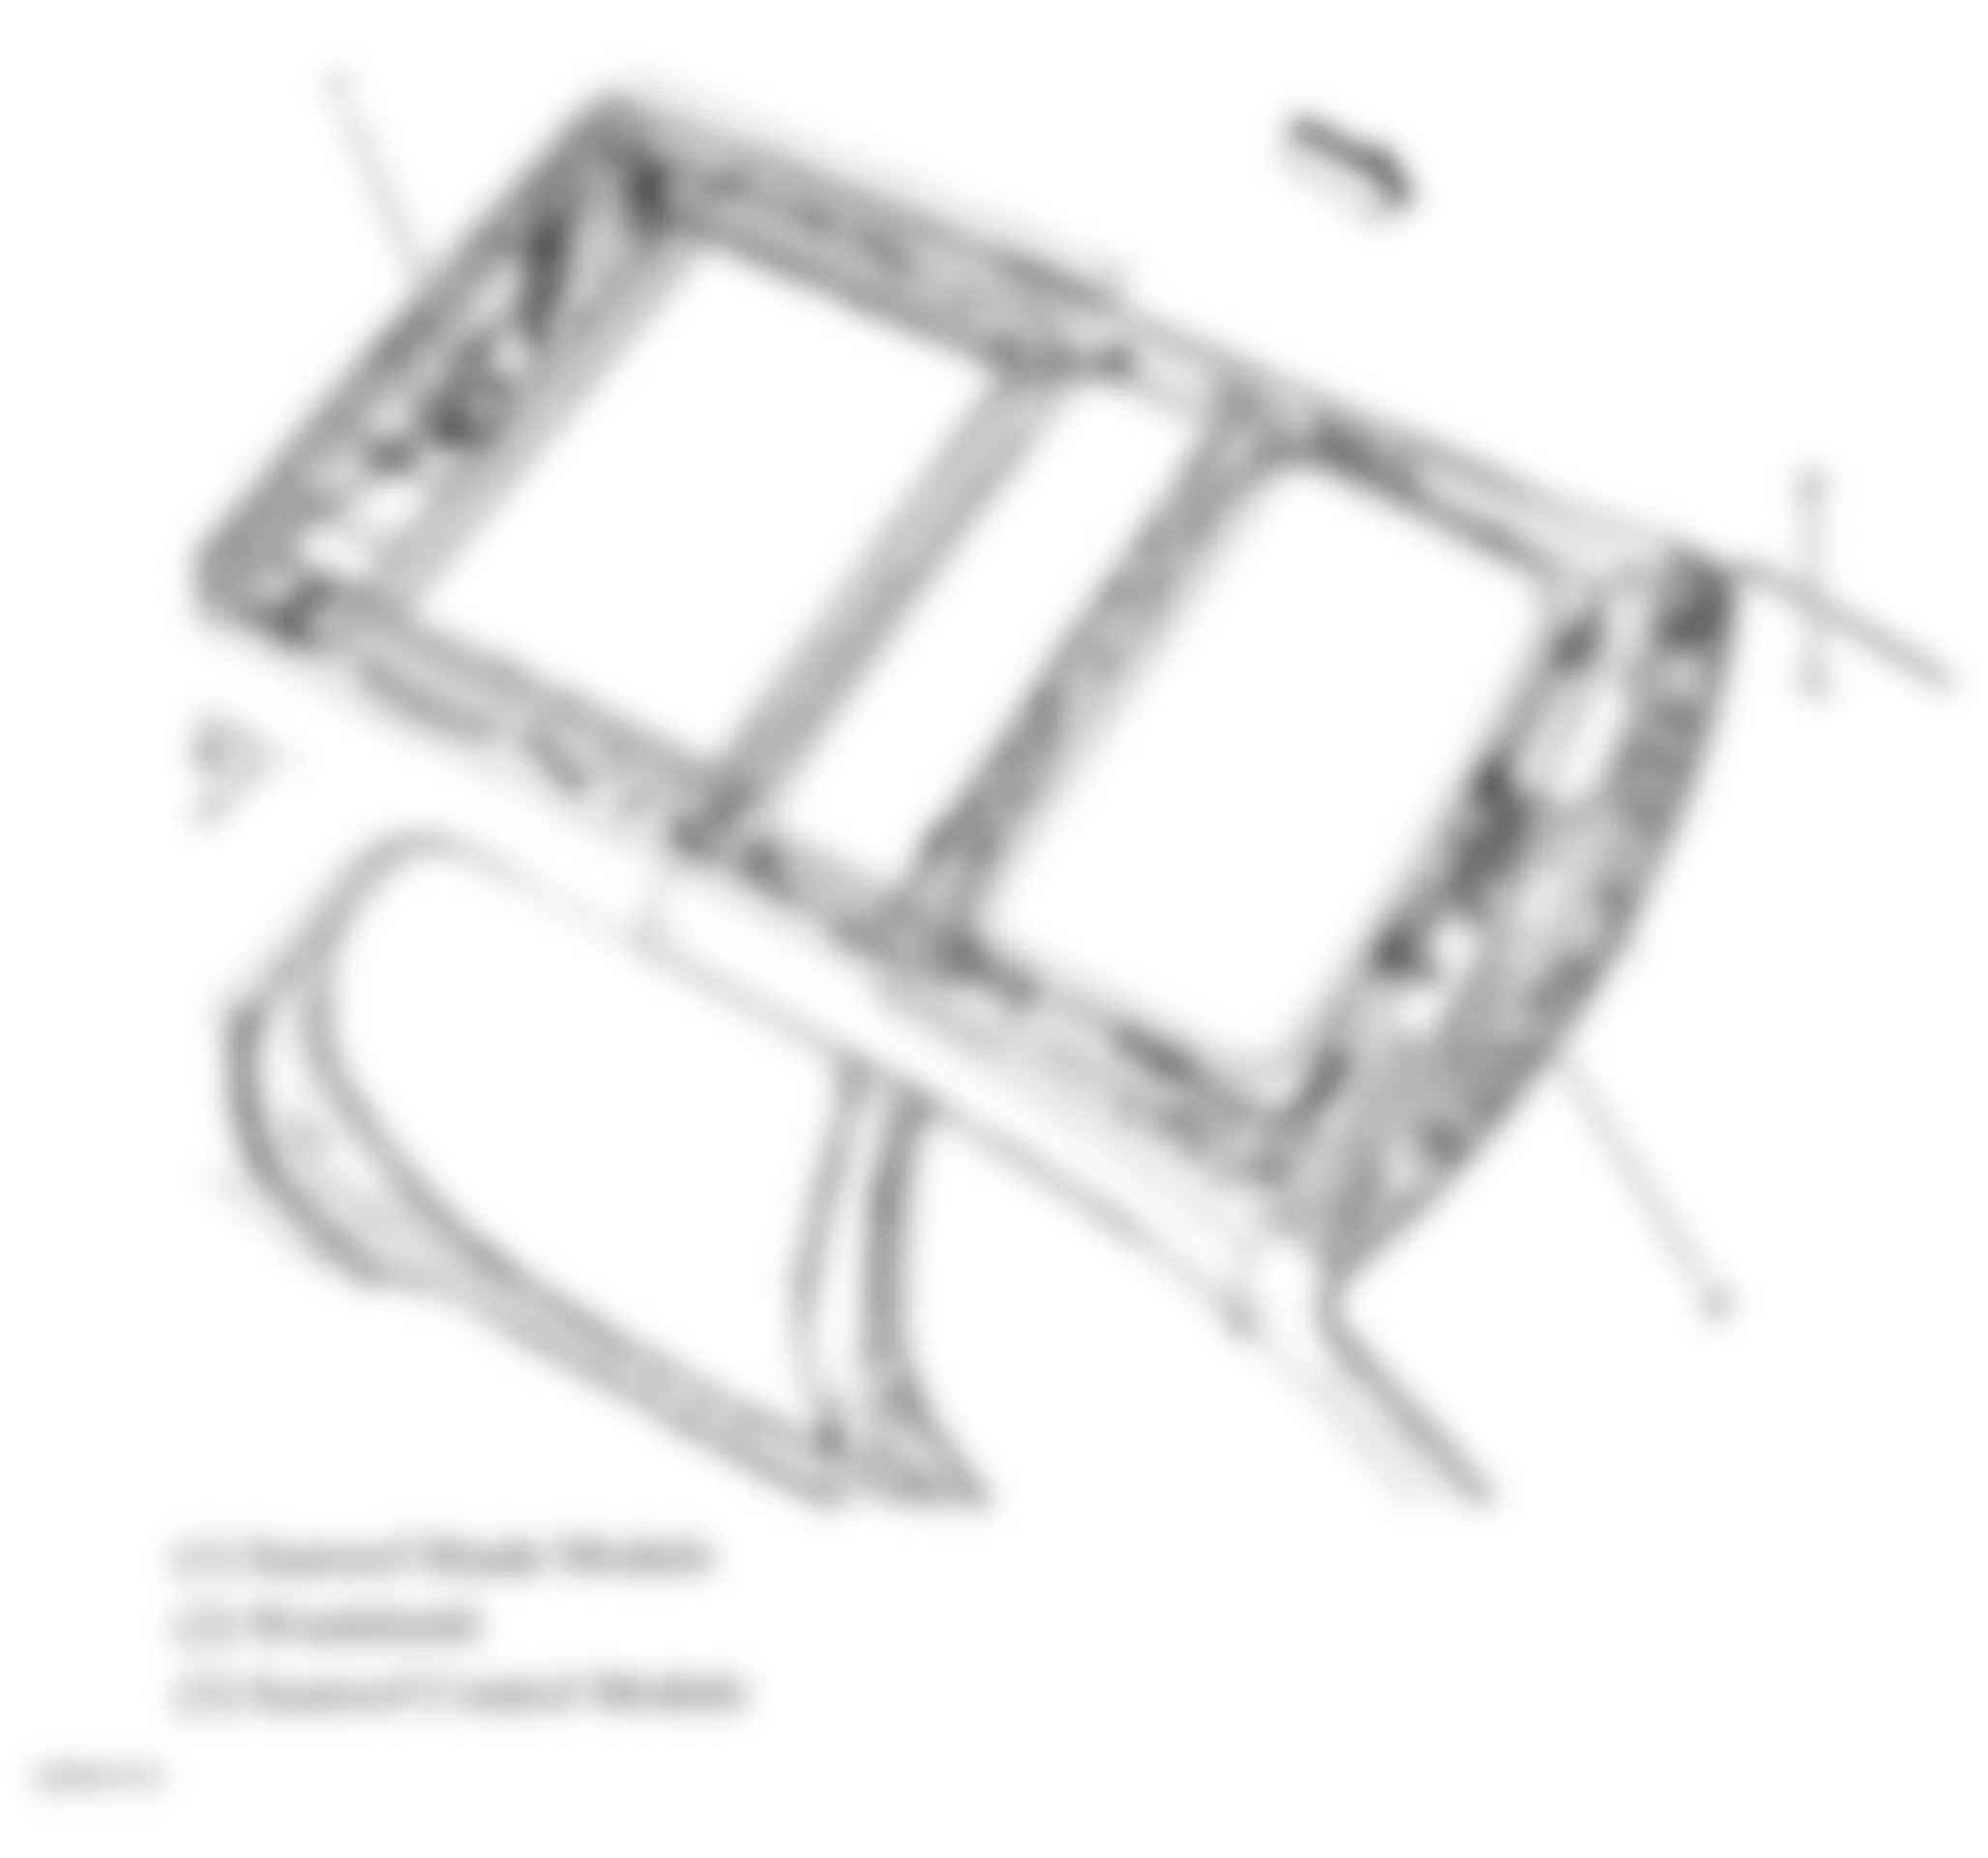 Buick Enclave CXL 2009 - Component Locations -  Roof